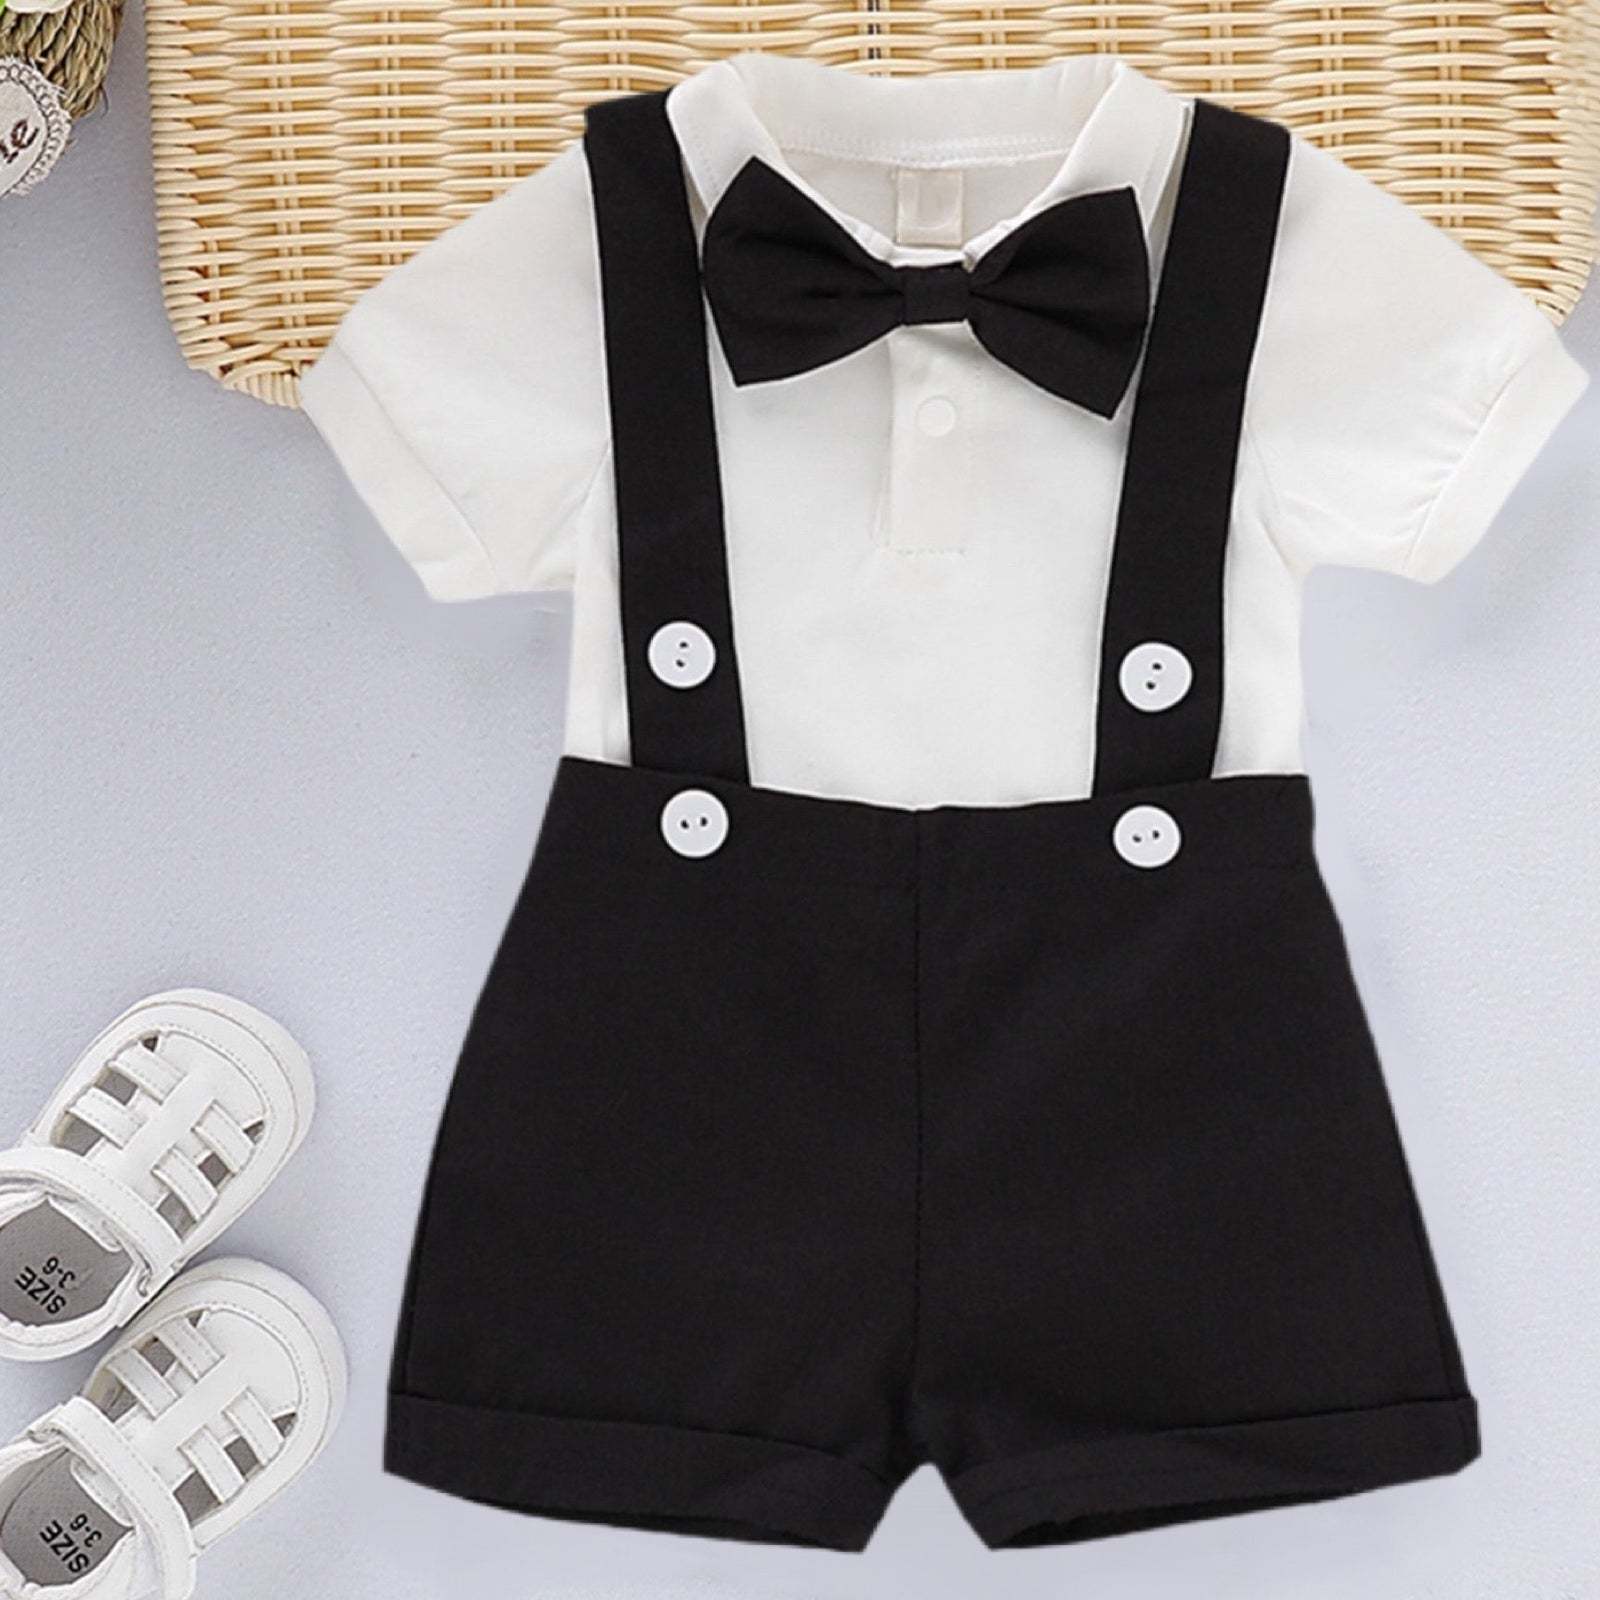 Infant Toddler Boys Easter Outfit, Shirt Shorts Suspenders & Bow Tie